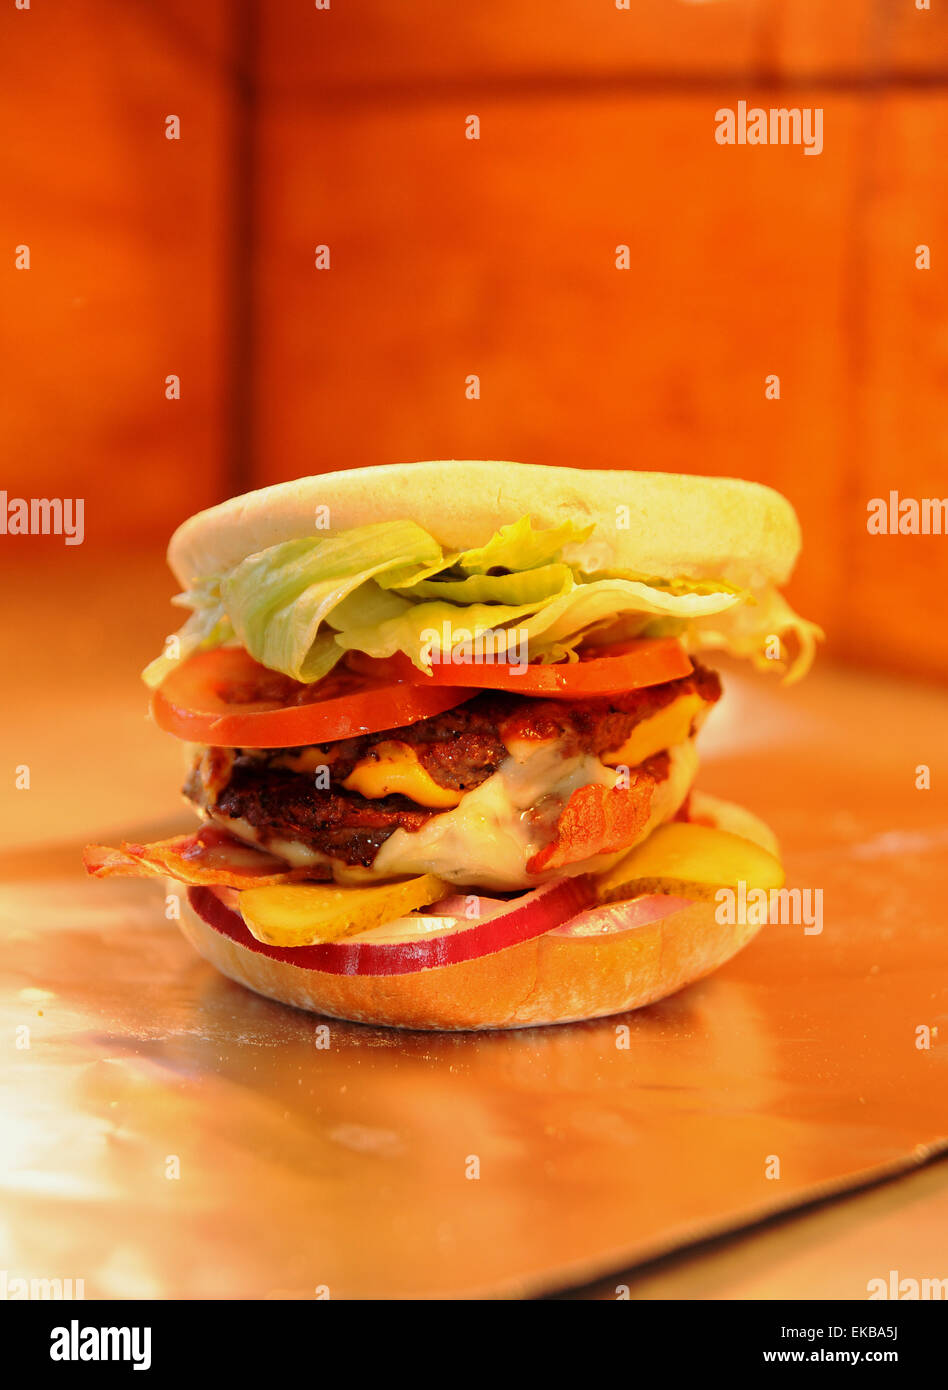 Burger in a bun with cheese and bacon in the hot service area of take away fast food shop Stock Photo